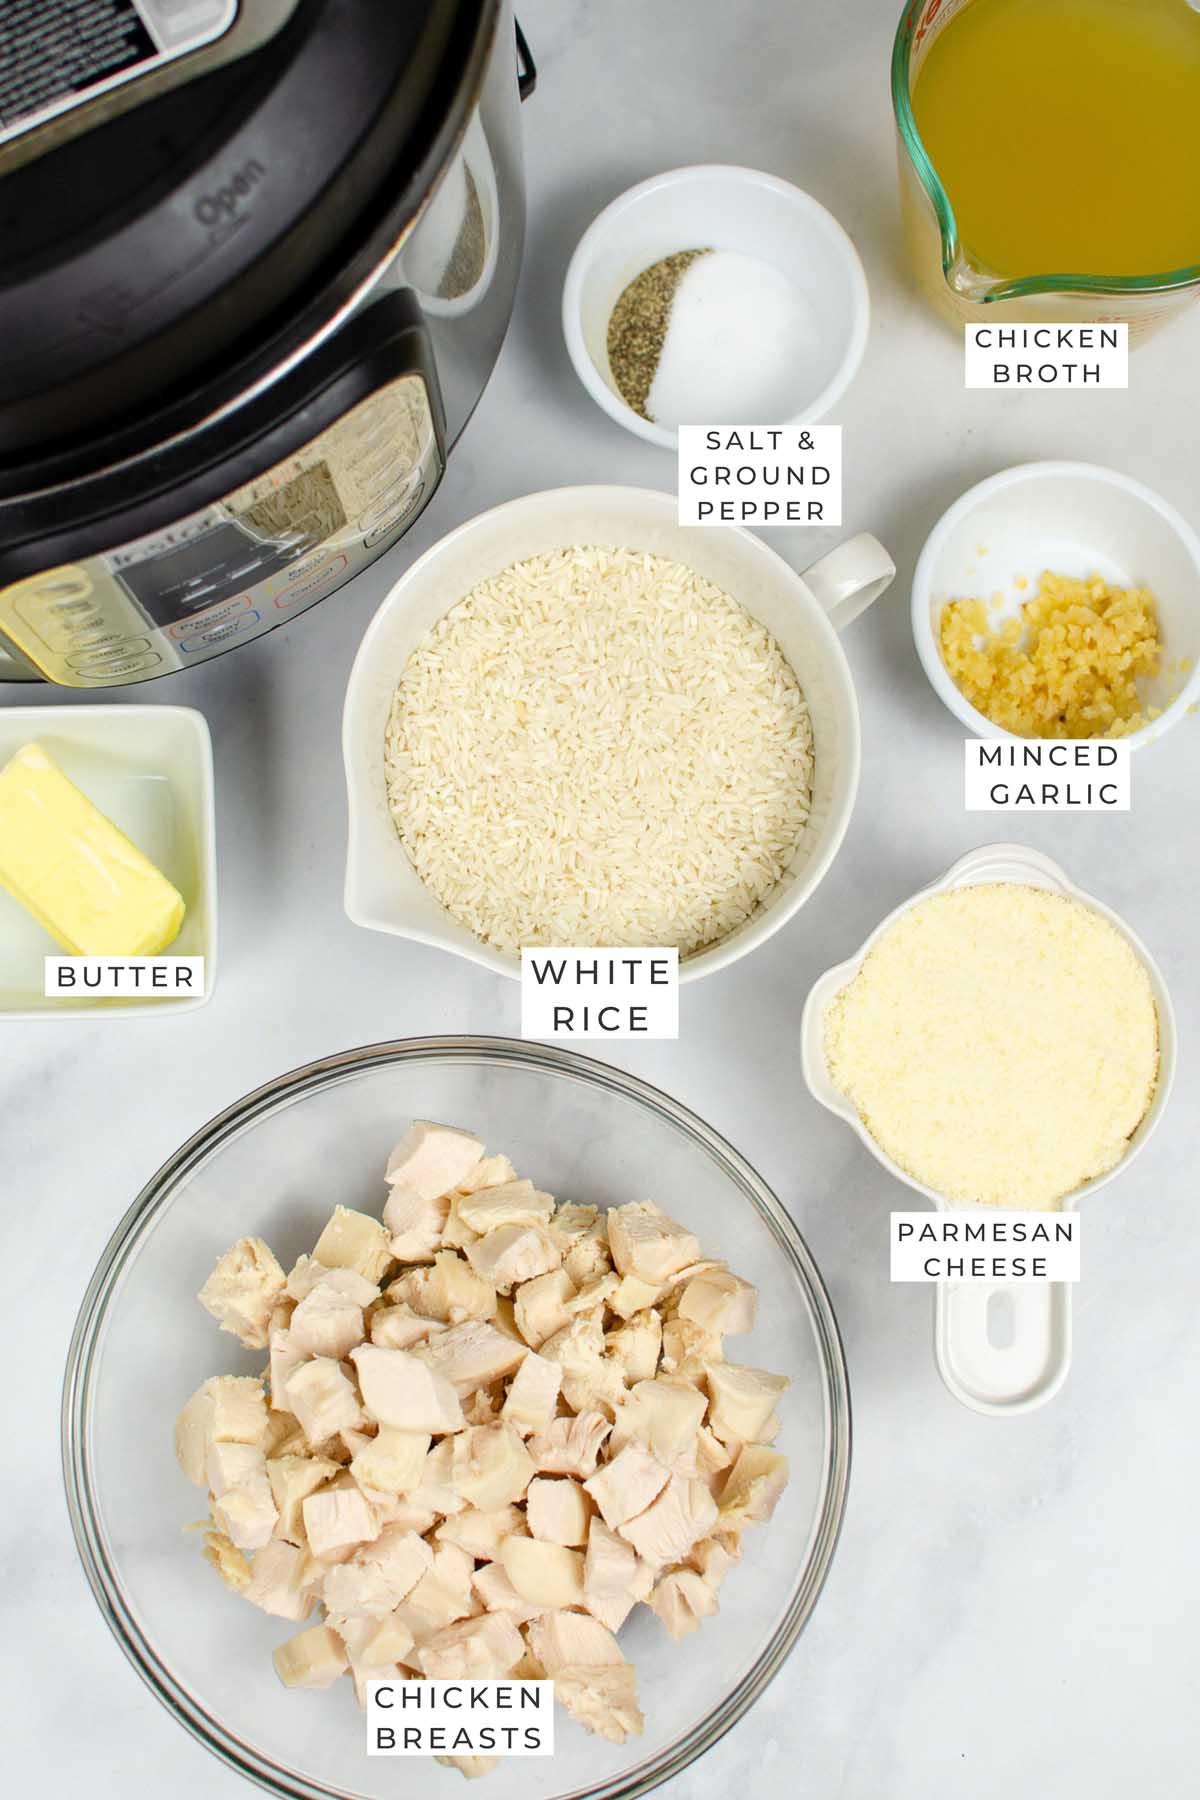 Instant Pot chicken and rice labeled ingredients.